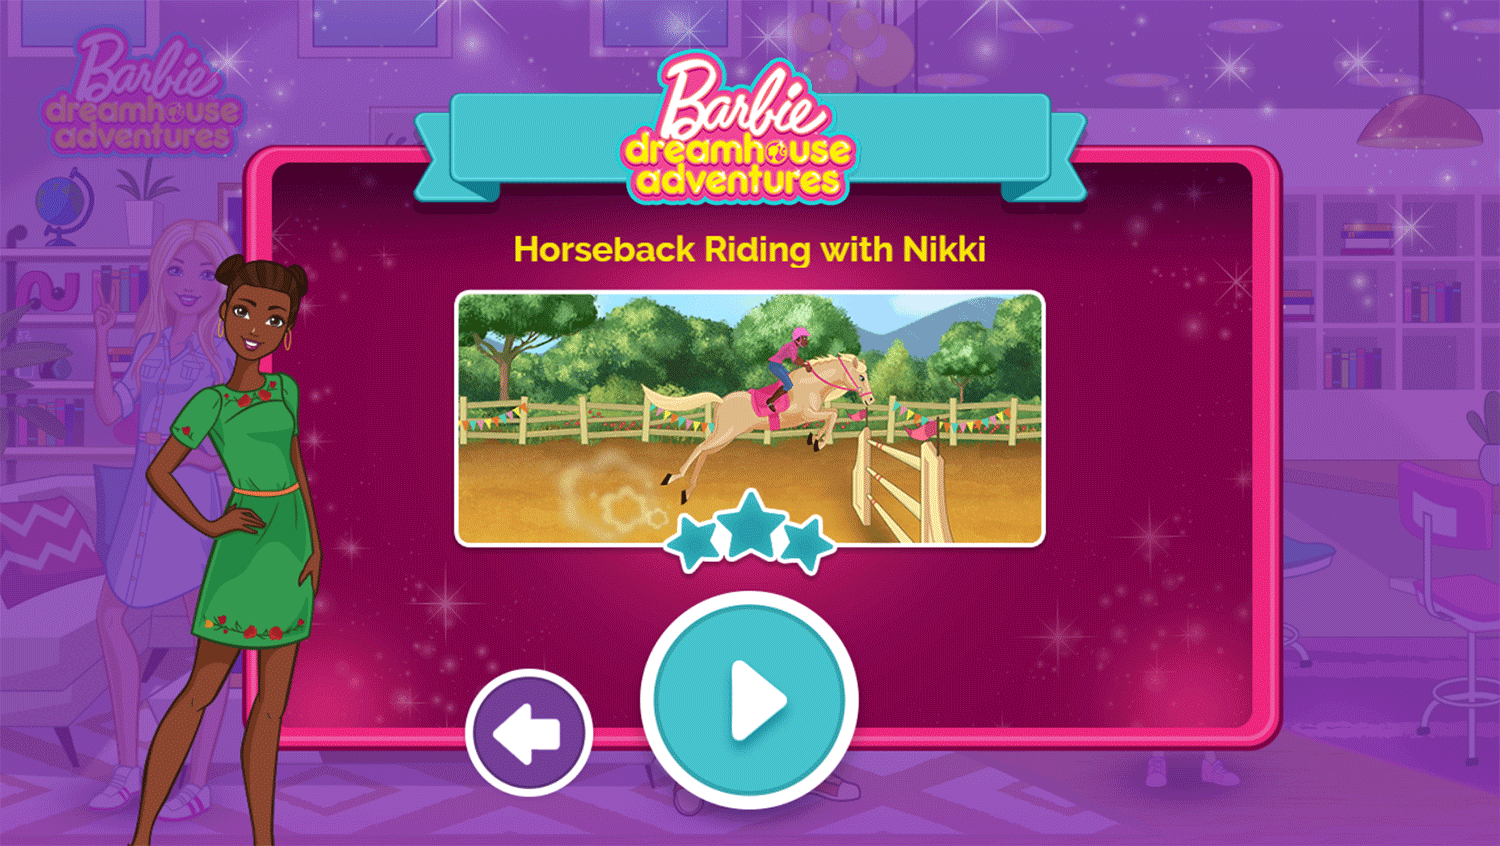 Barbie Dreamhouse Adventure Horse Riding with Nikki Game Welcome Screenshot.